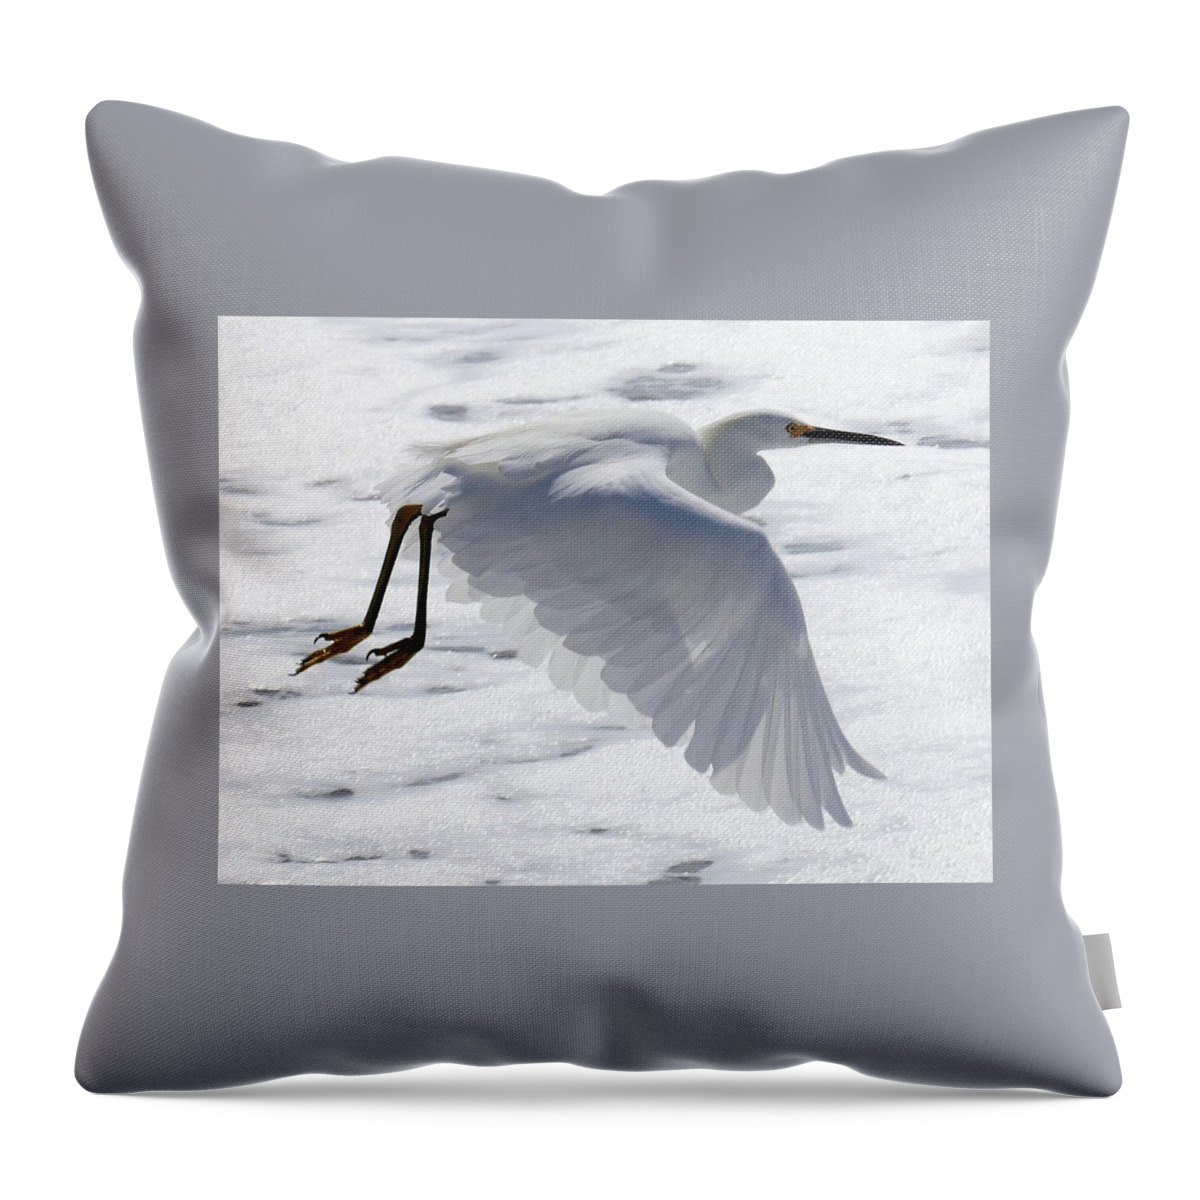 Egret Throw Pillow featuring the photograph On The Move by Leslie Abbott by California Coastal Commission